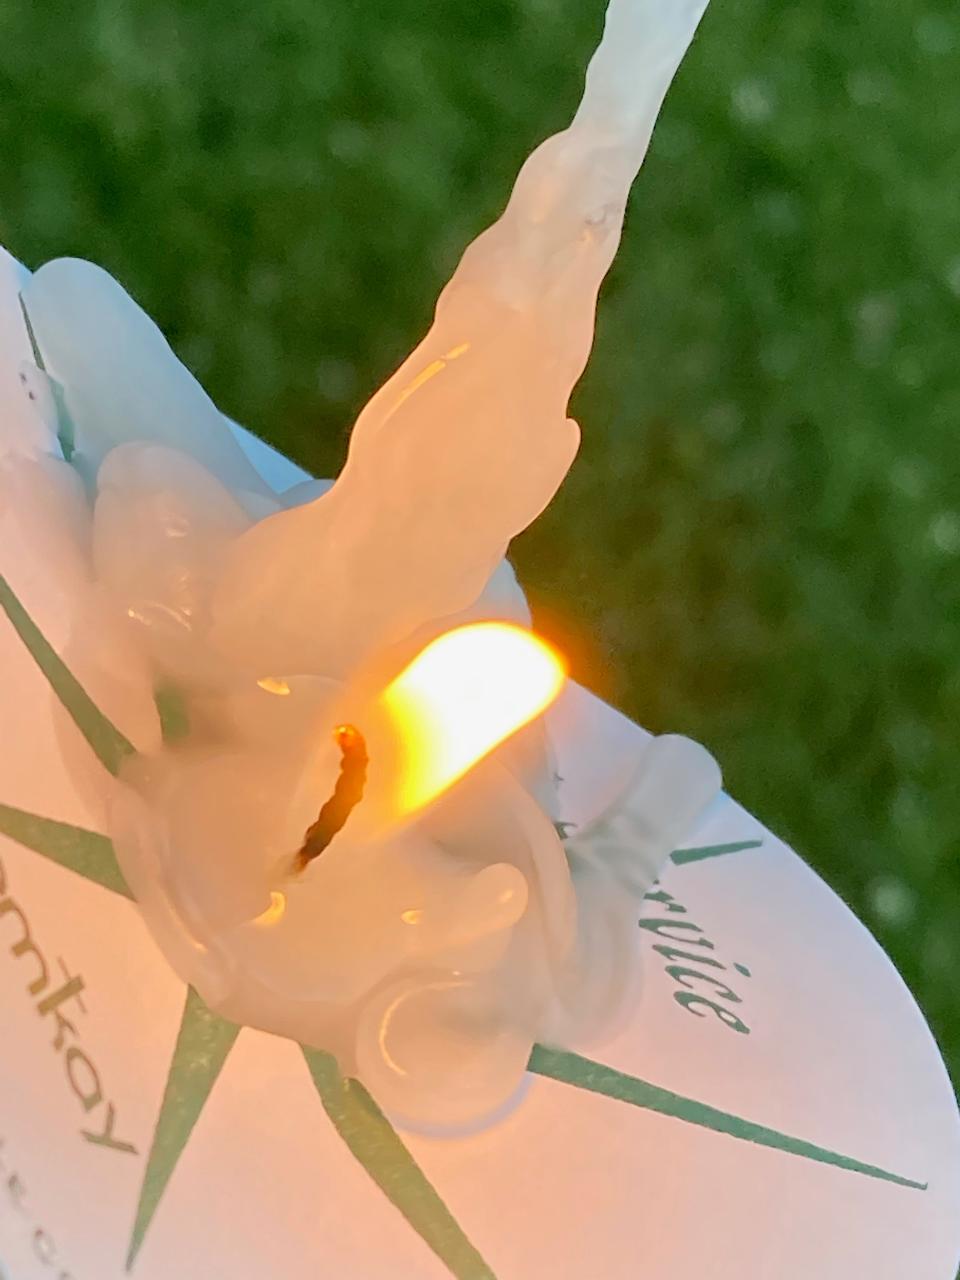 A candle burns during a Saturday night vigil for the victims of the June 9 shootings near Smithsburg. More than 100 people attended the vigil at Lions Community Park, maybe 3/10ths of a mile from the manufacturing business where four people were shot.